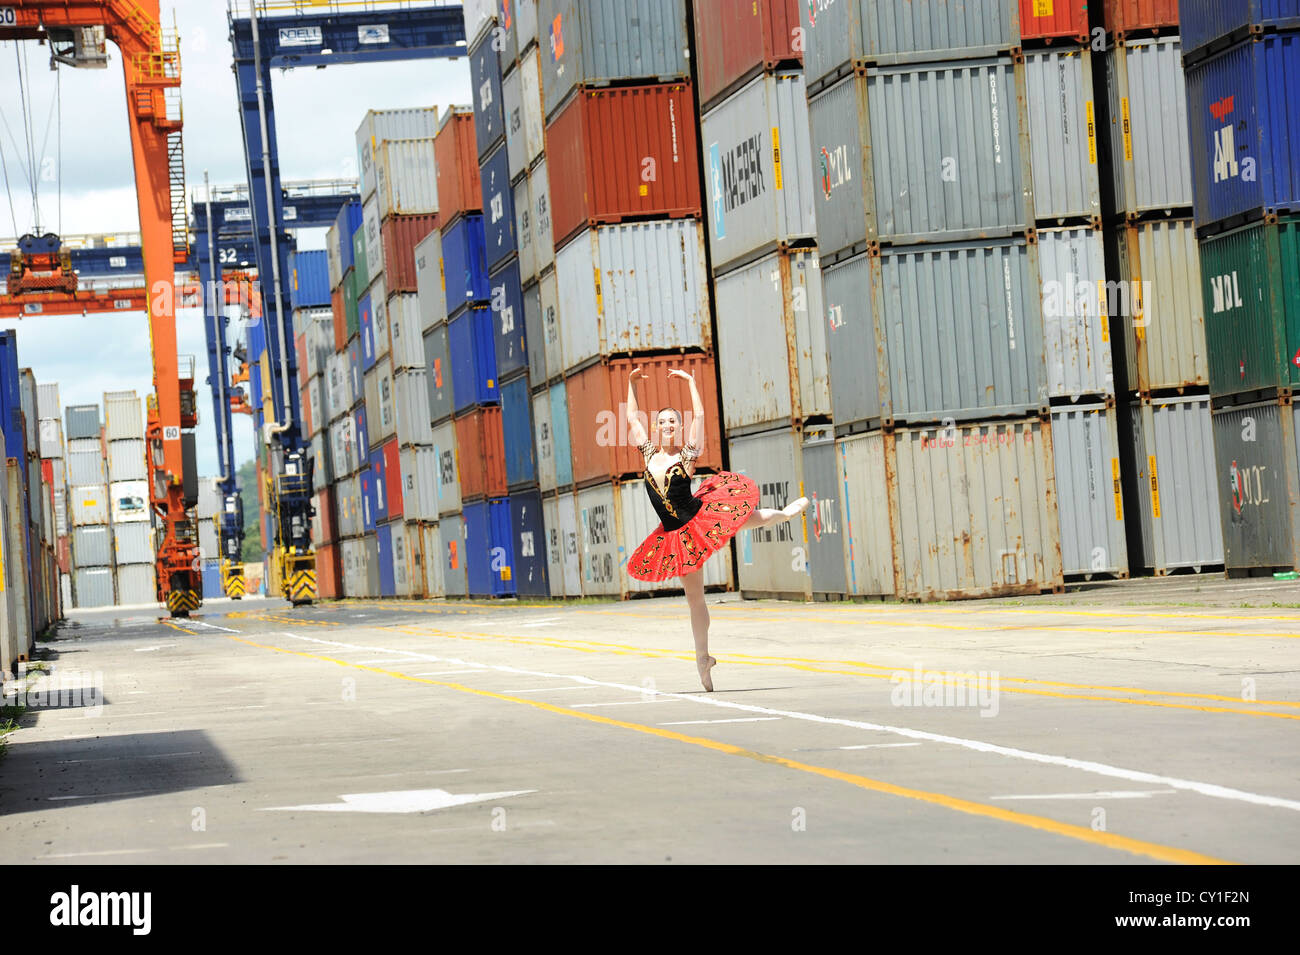 A dancer of the National Ballet of Panama, posing in the city port. Stock Photo